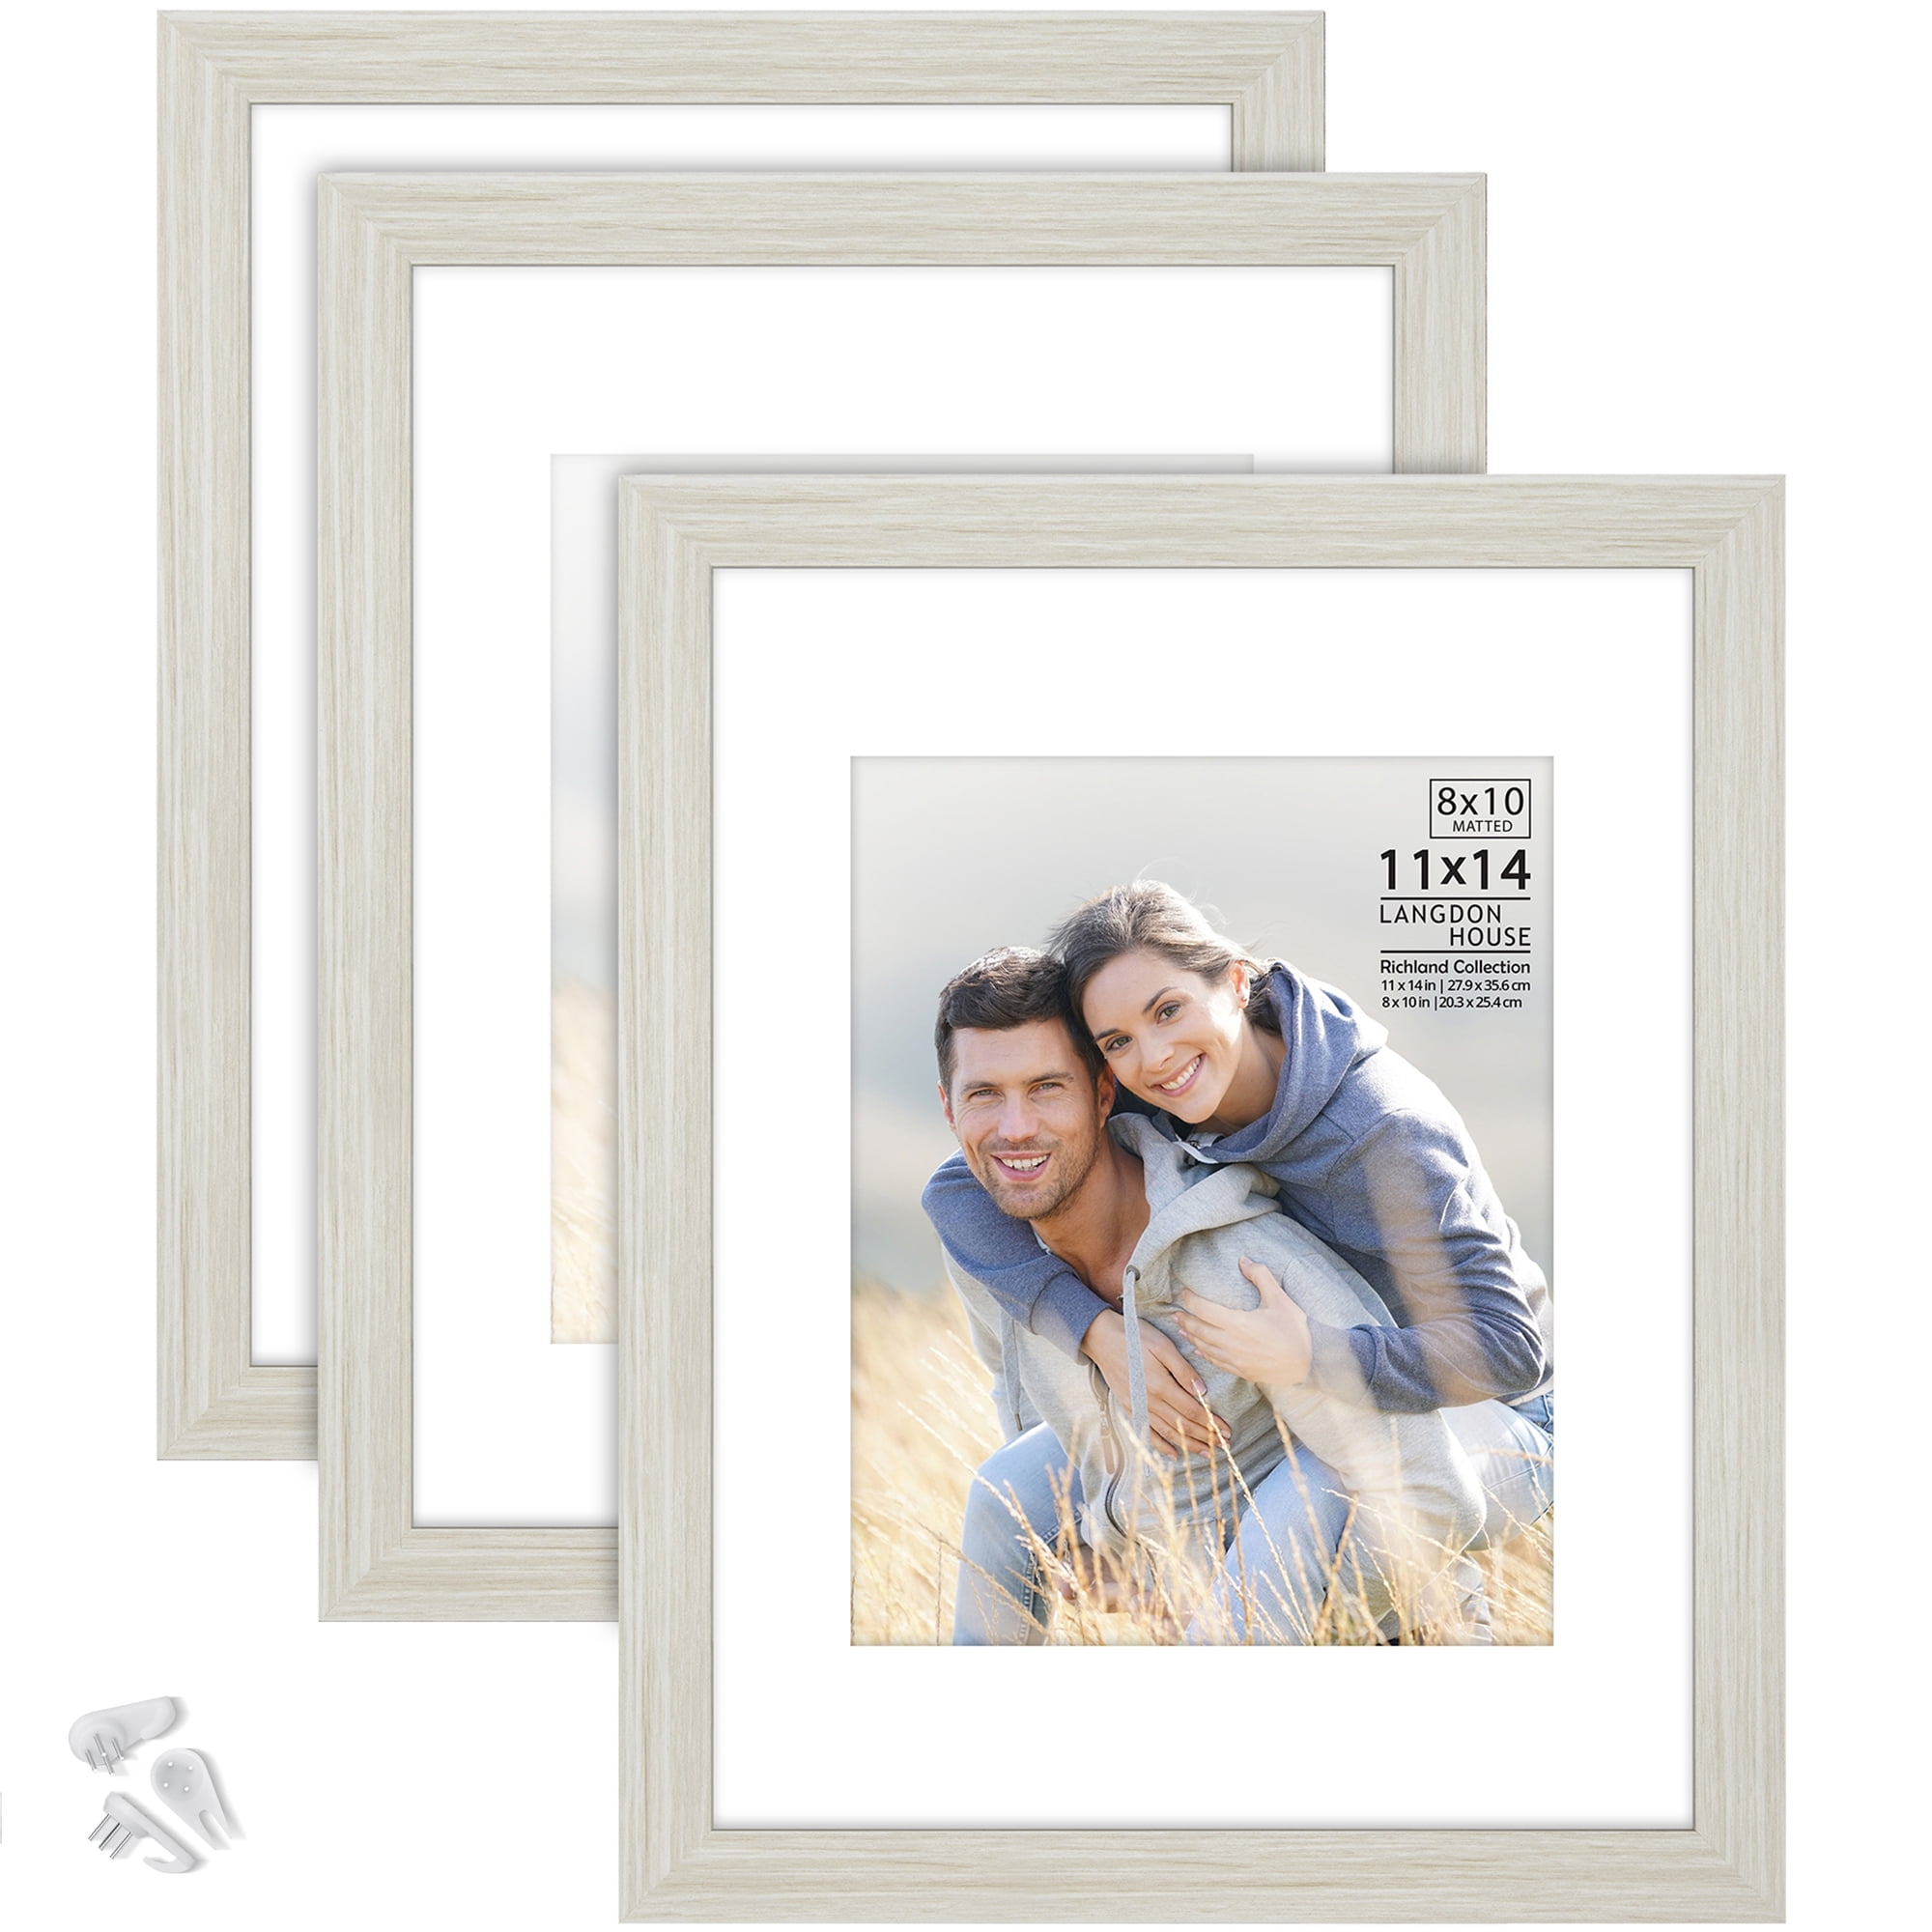 Langdon House 4x6 Picture Frames White, 6 Pack Wall M Contemporary Frame Set 